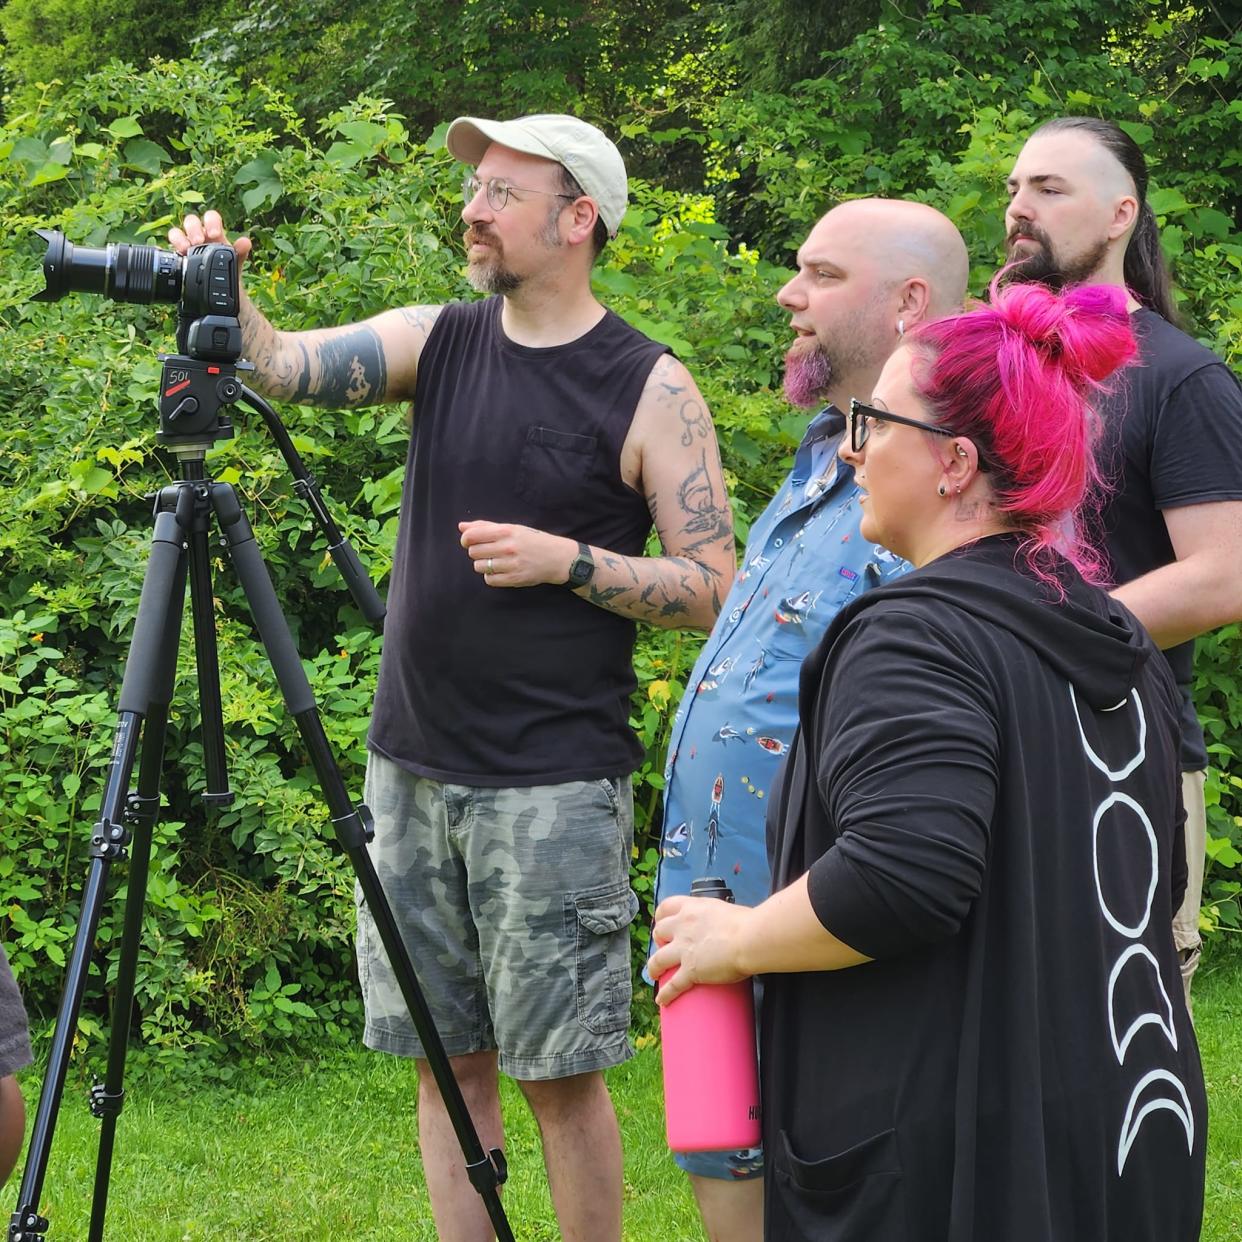 Grafton filmmaker Ashes Homon-Rahall working on the set of a local film in 2023, Killing with Kindness. Homon-Rahall has entered her first film, Sweet Dreams, into the Access Film Festival taking place later this year.